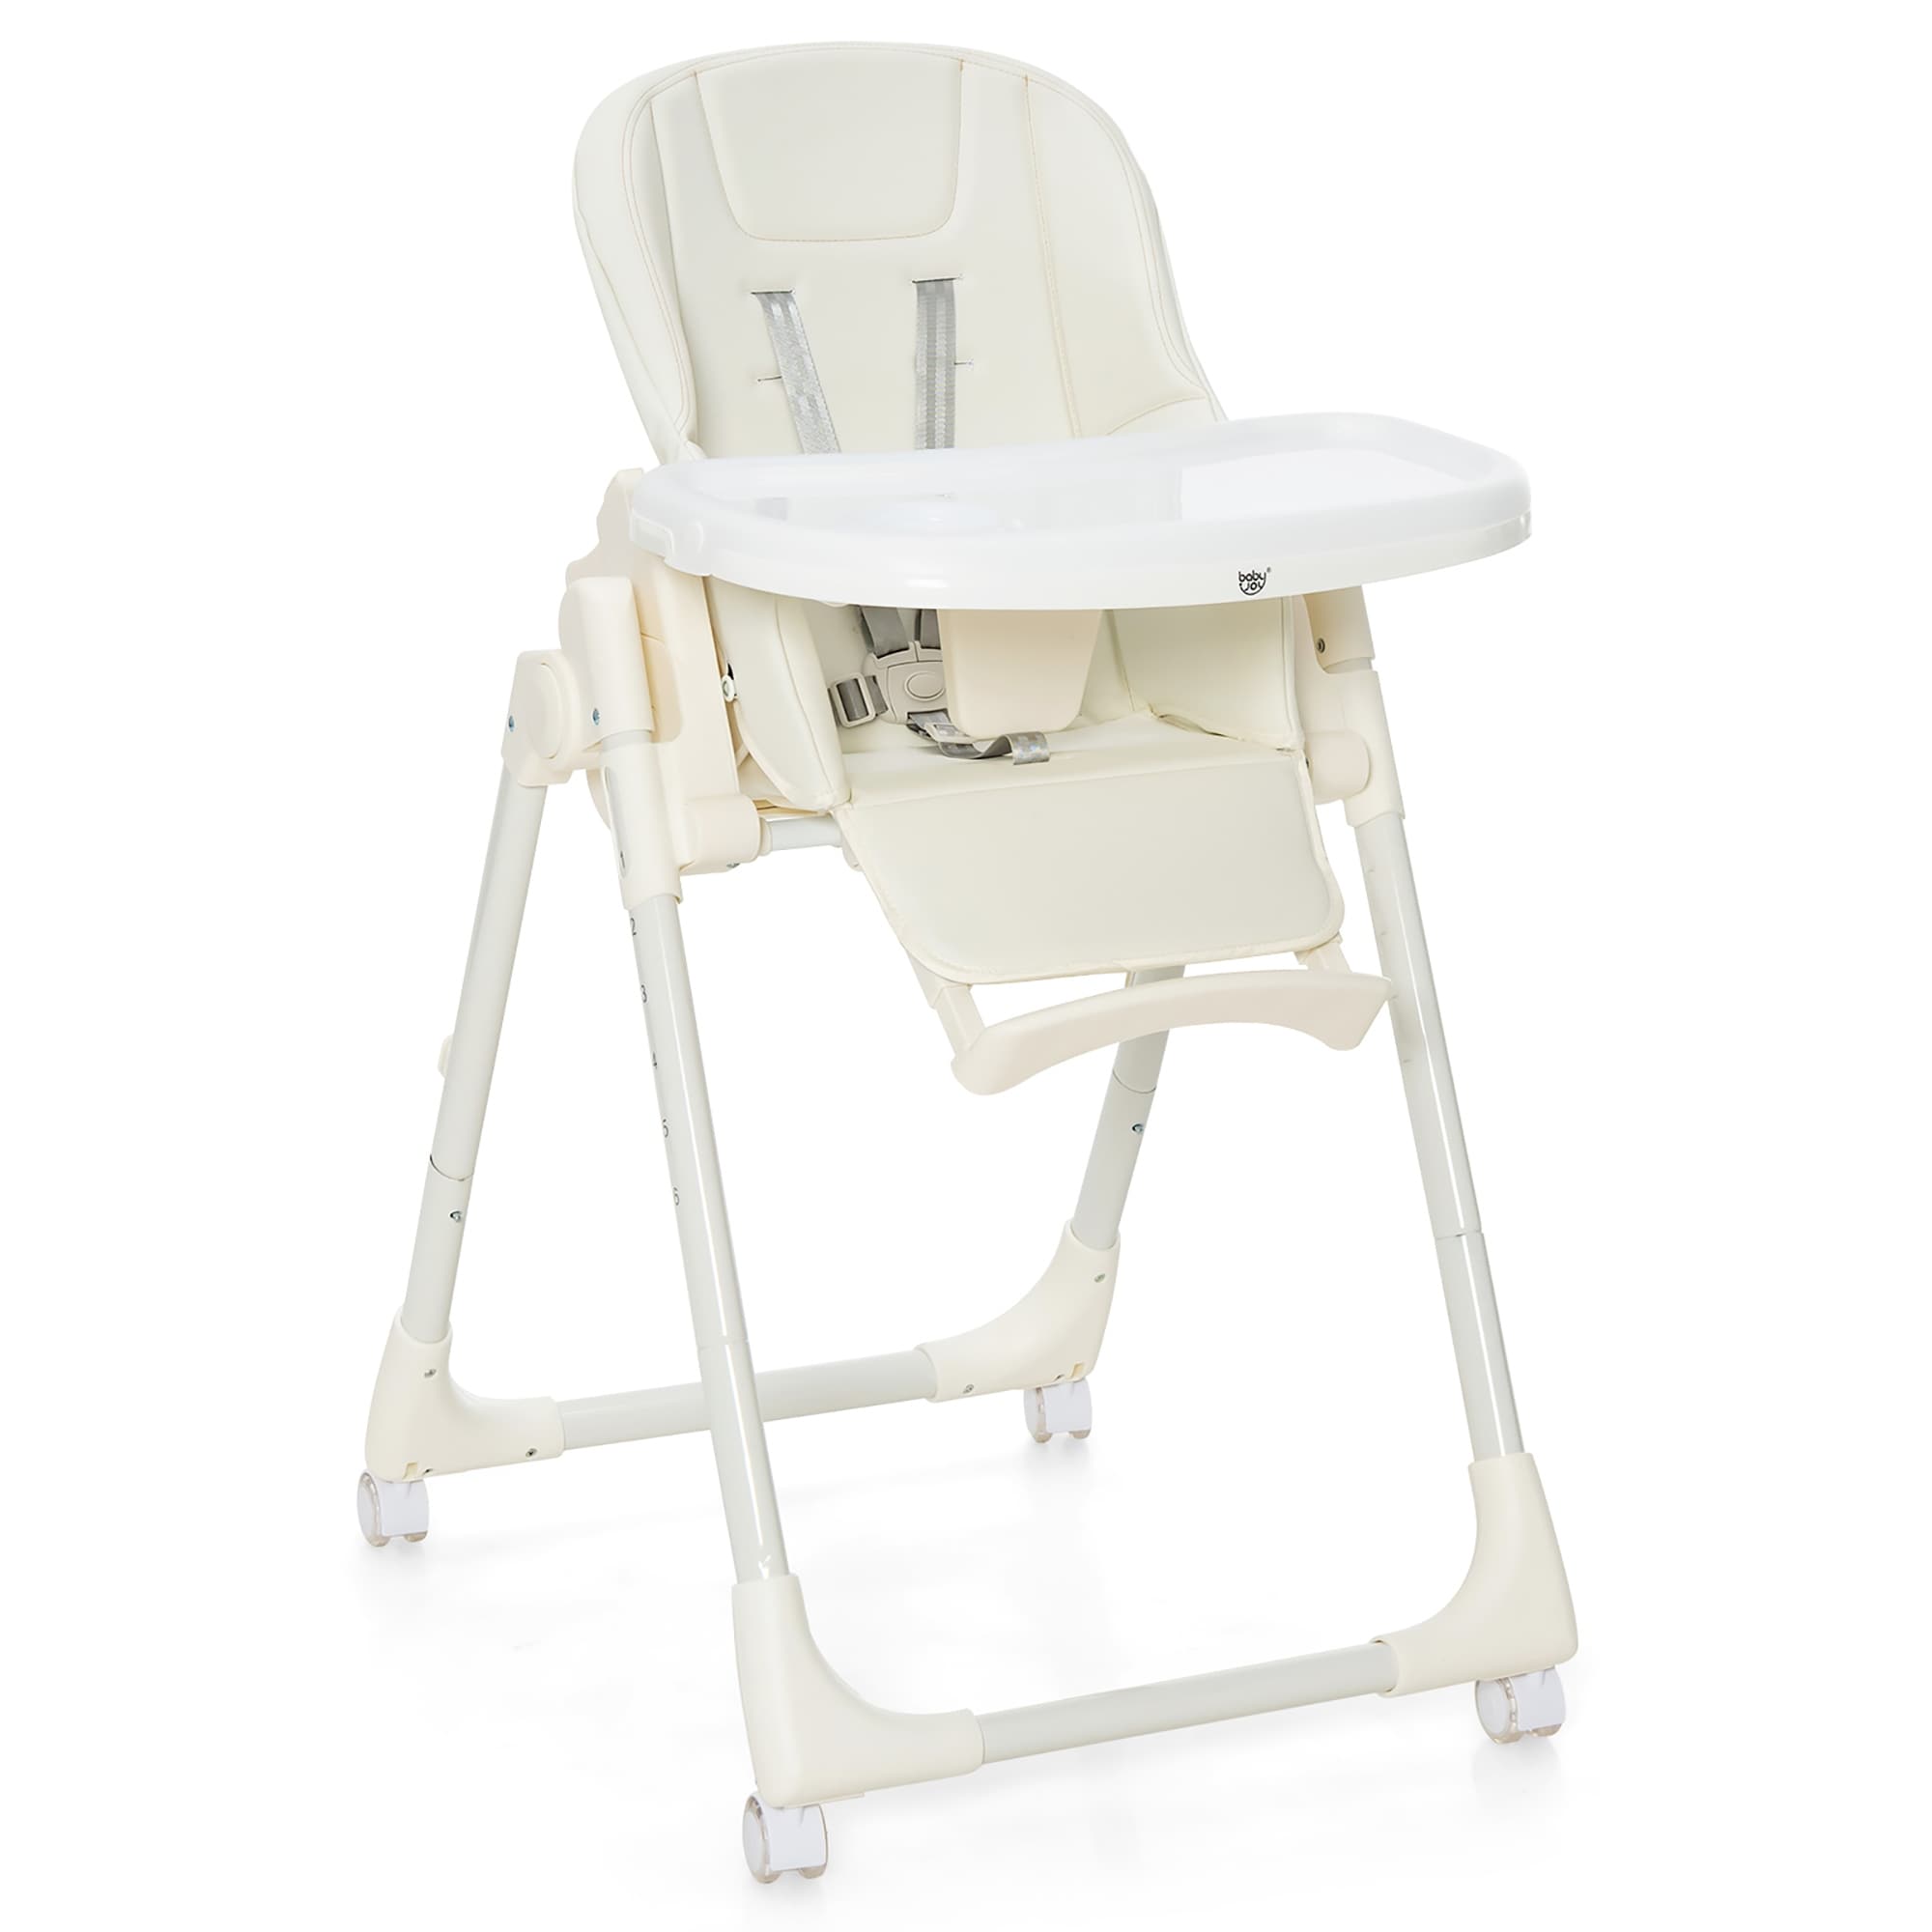 https://ak1.ostkcdn.com/images/products/is/images/direct/4cb3c52877a873b508a6a26d88033b46f3b920ba/Babyjoy-Foldable-Baby-Highchair-with-360degrees-Rotating-Wheels-%26.jpg